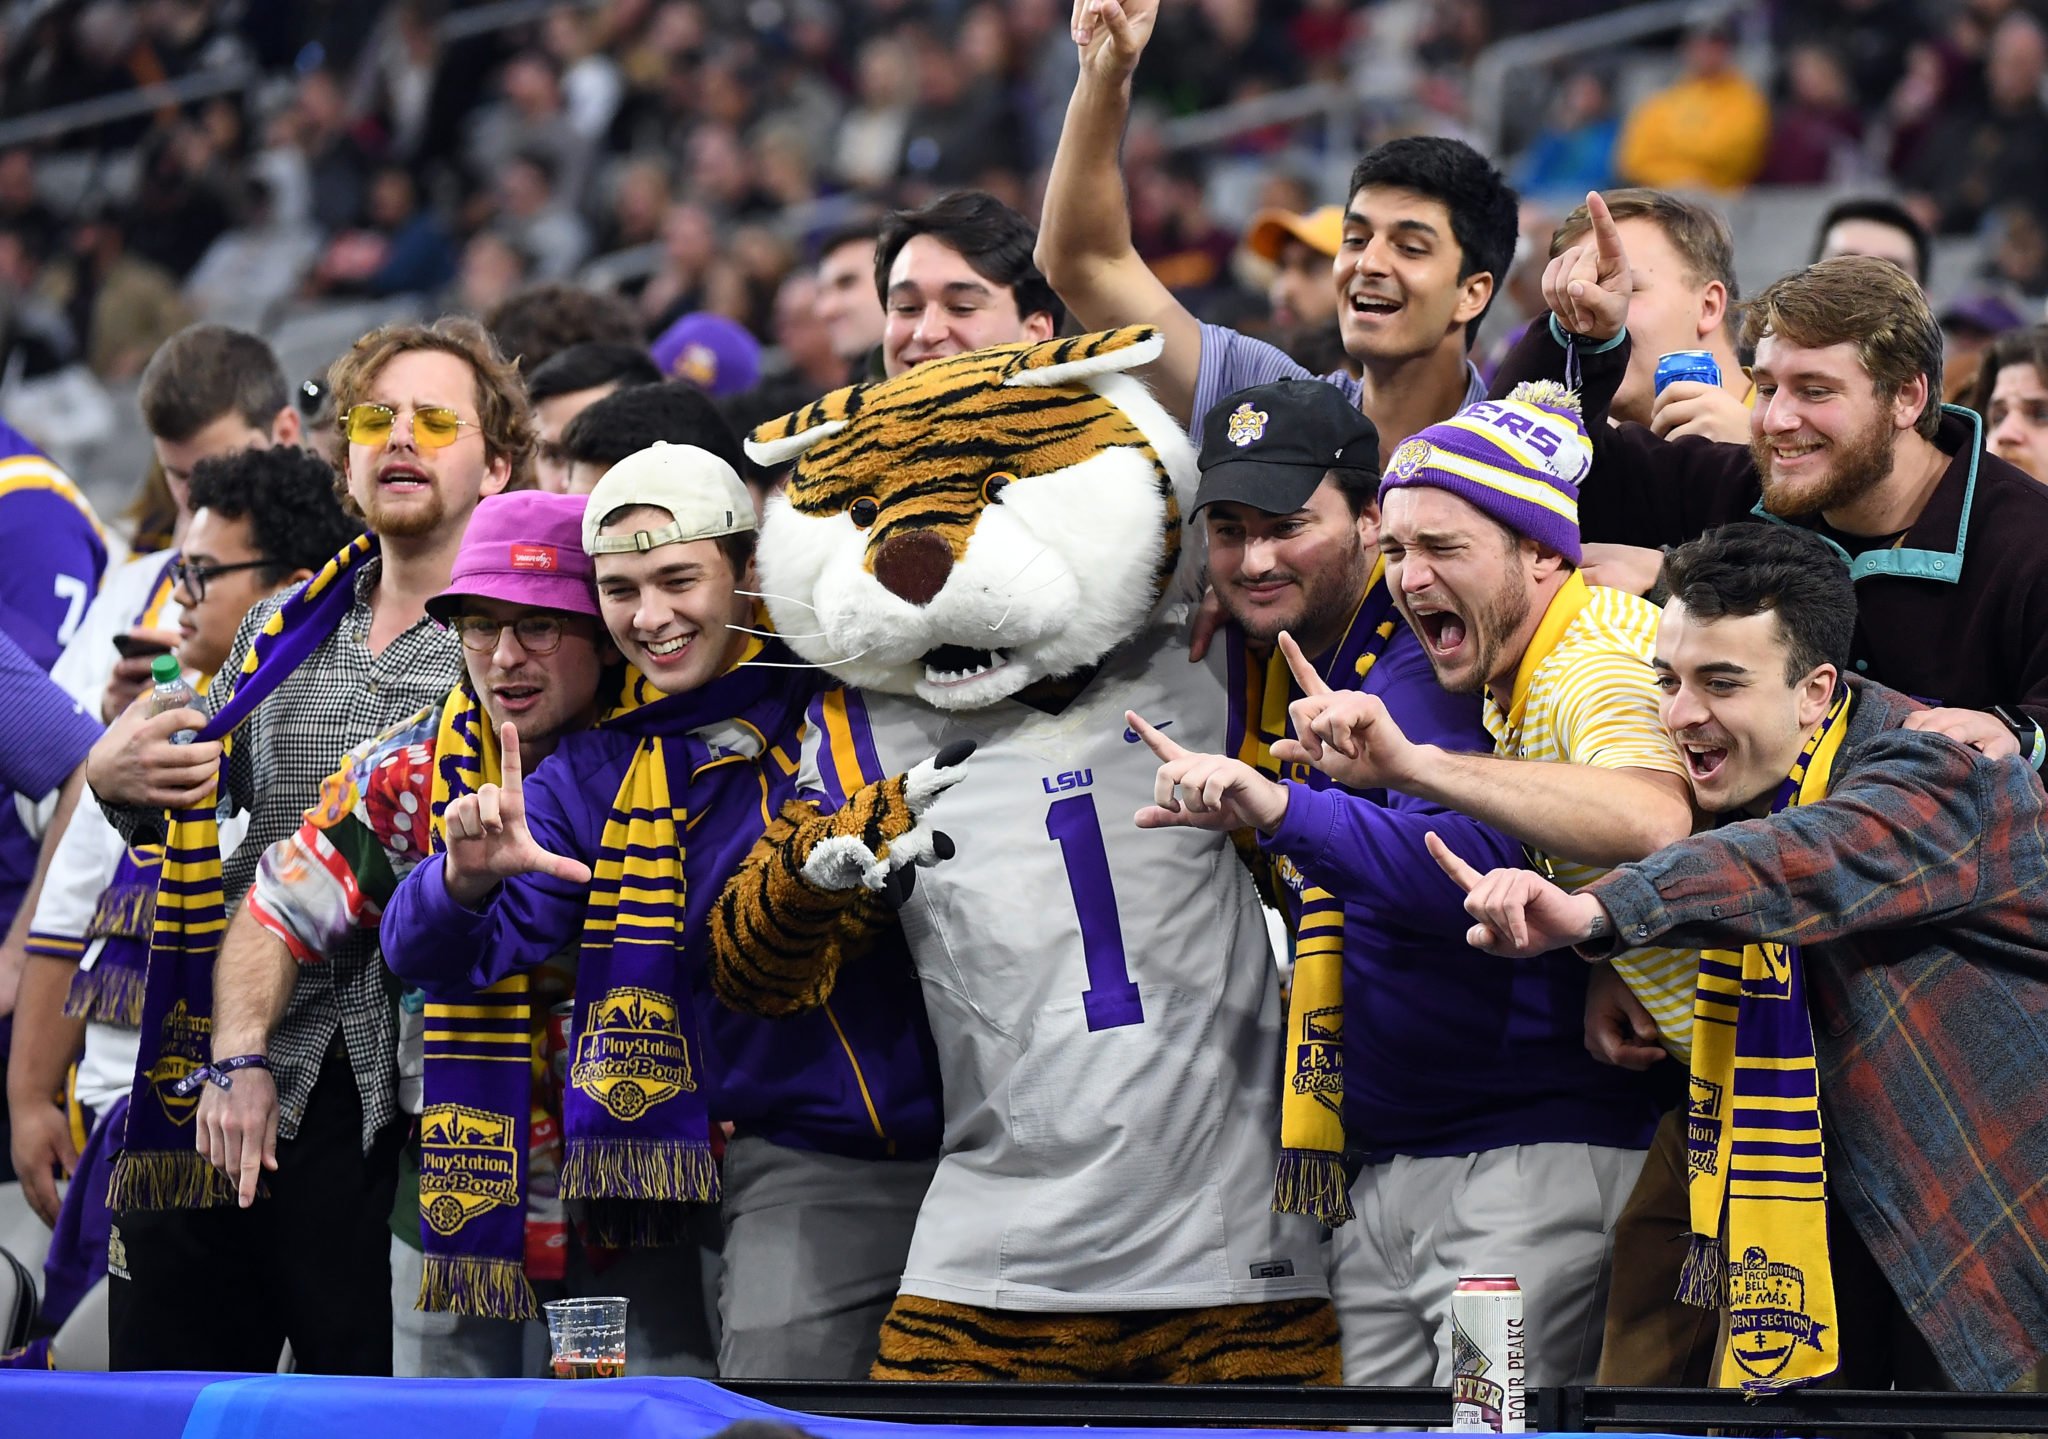 LSU Athletics Launches New Sports Mobile App Backed by Insights